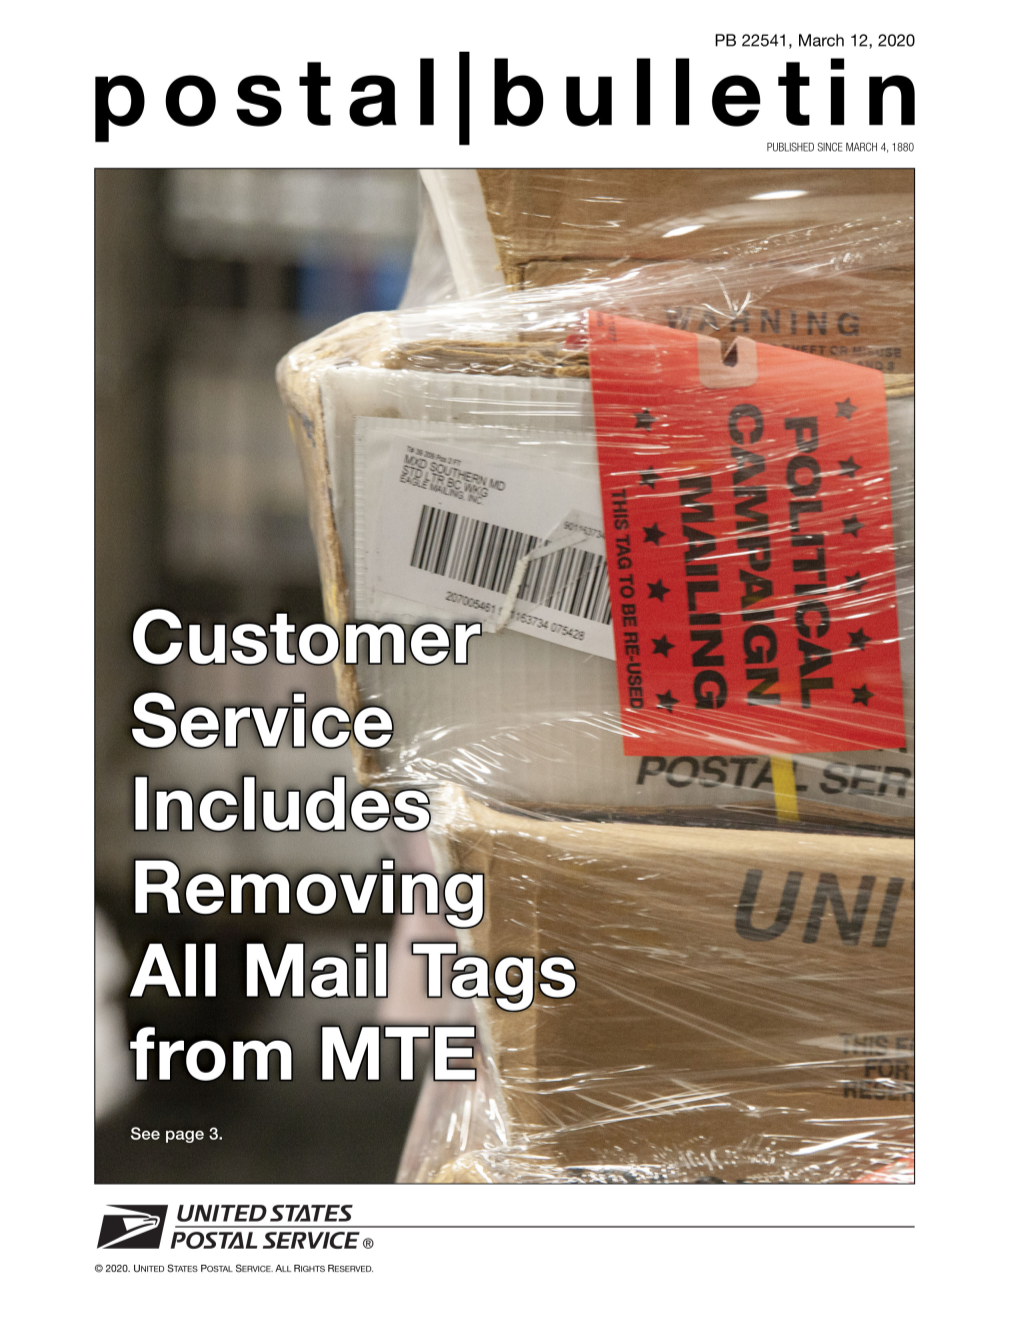 Postal Bulletin 22541 March 12, 2020. Customer Service Includes Removing All Mail Tags From